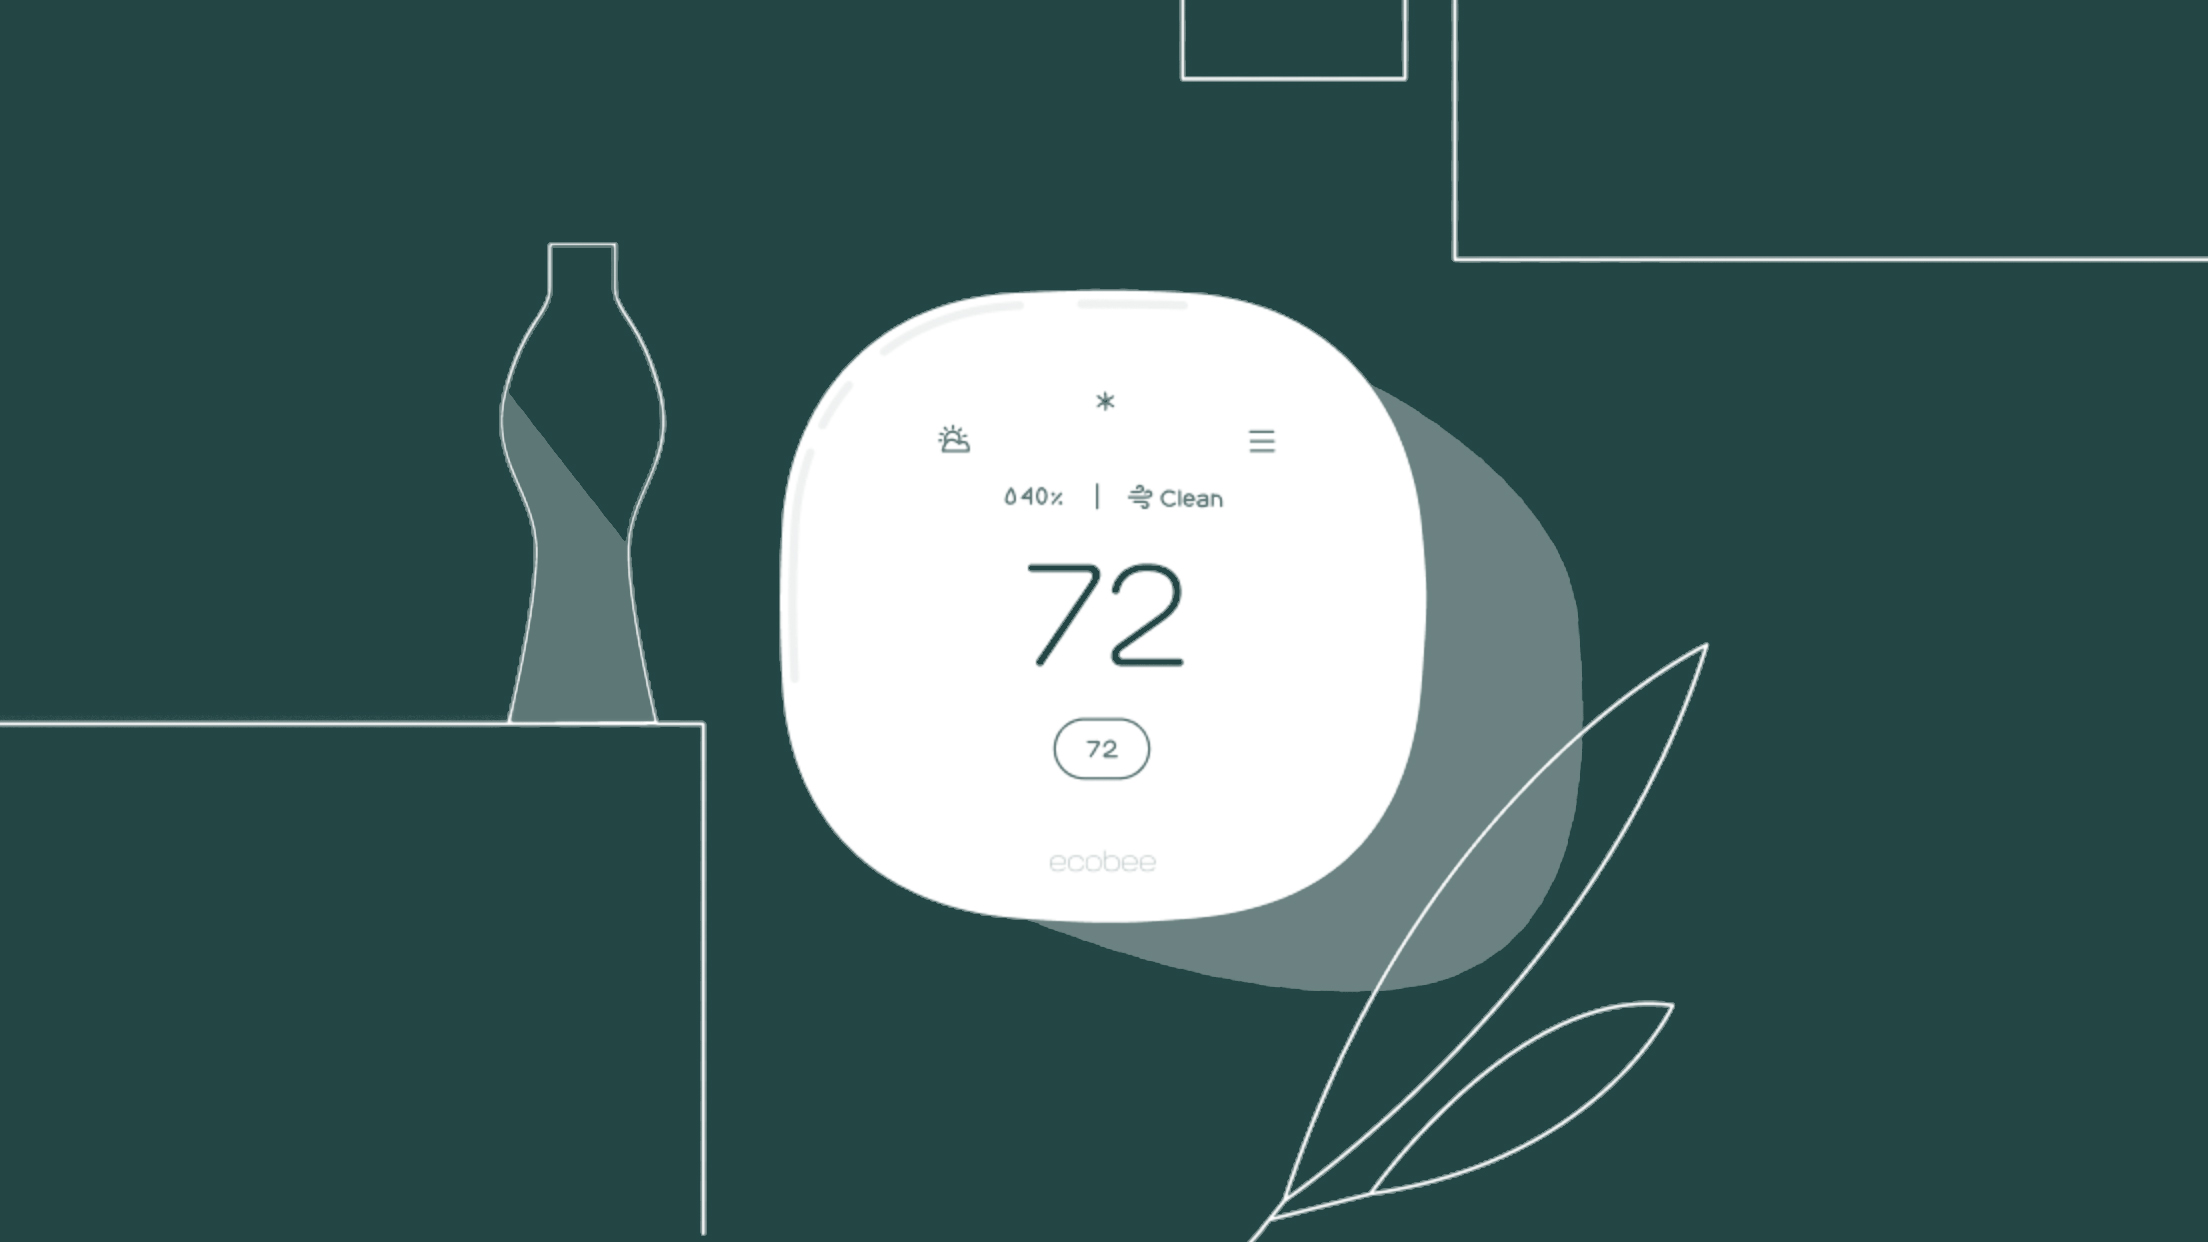 Ecobee Planning New Smart Thermostat With Built-In Air Quality Sensor